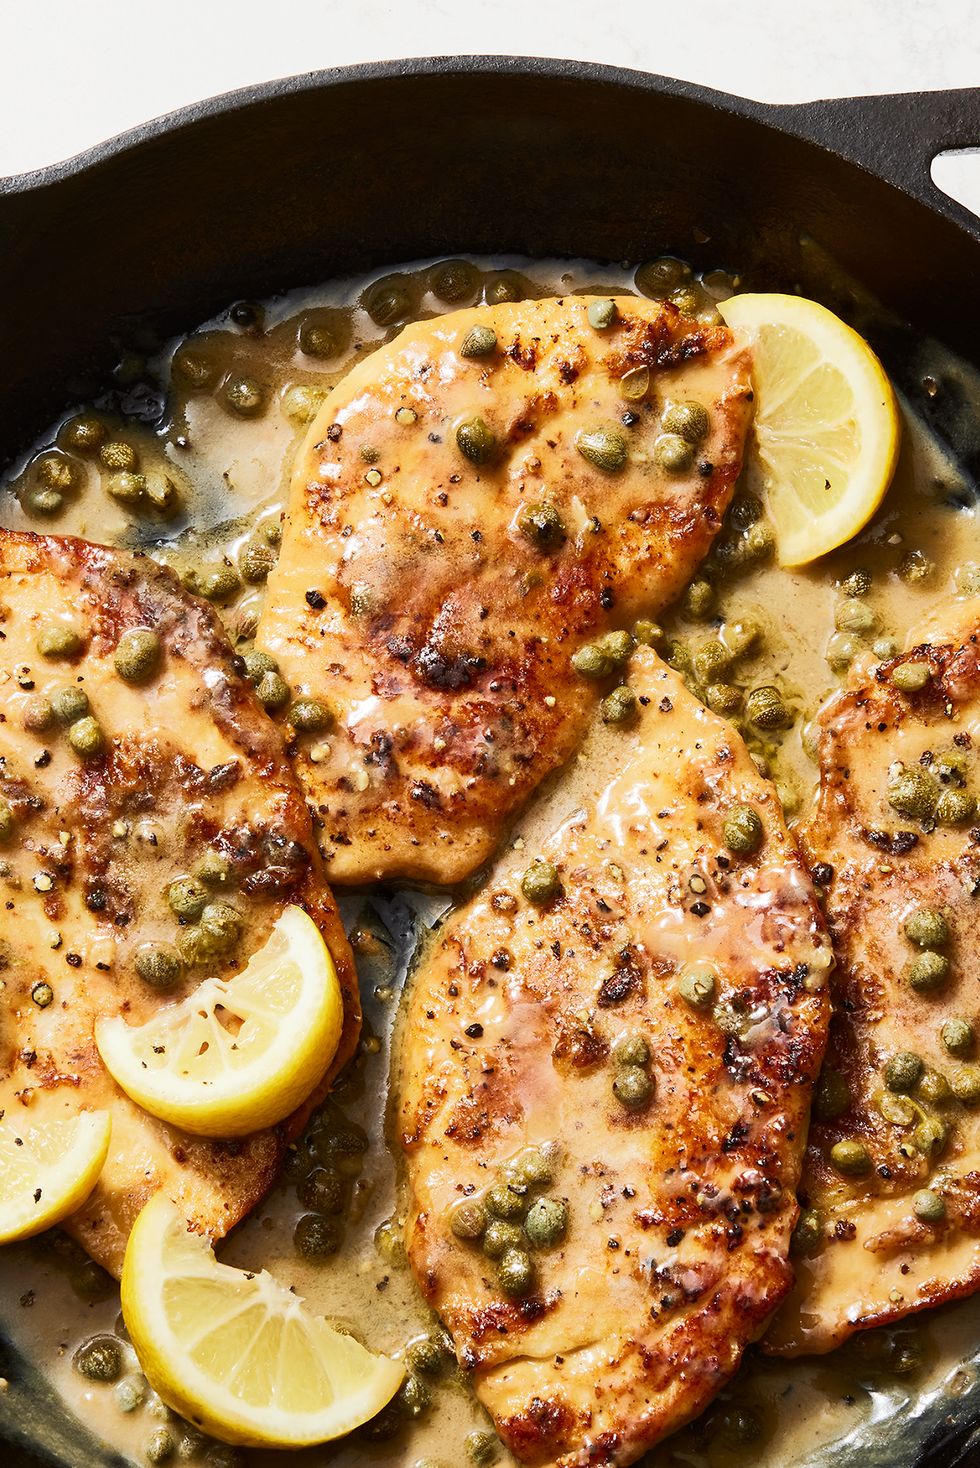 25 Chicken Dinner Recipes For Two - Chicken Dinner Ideas For Two